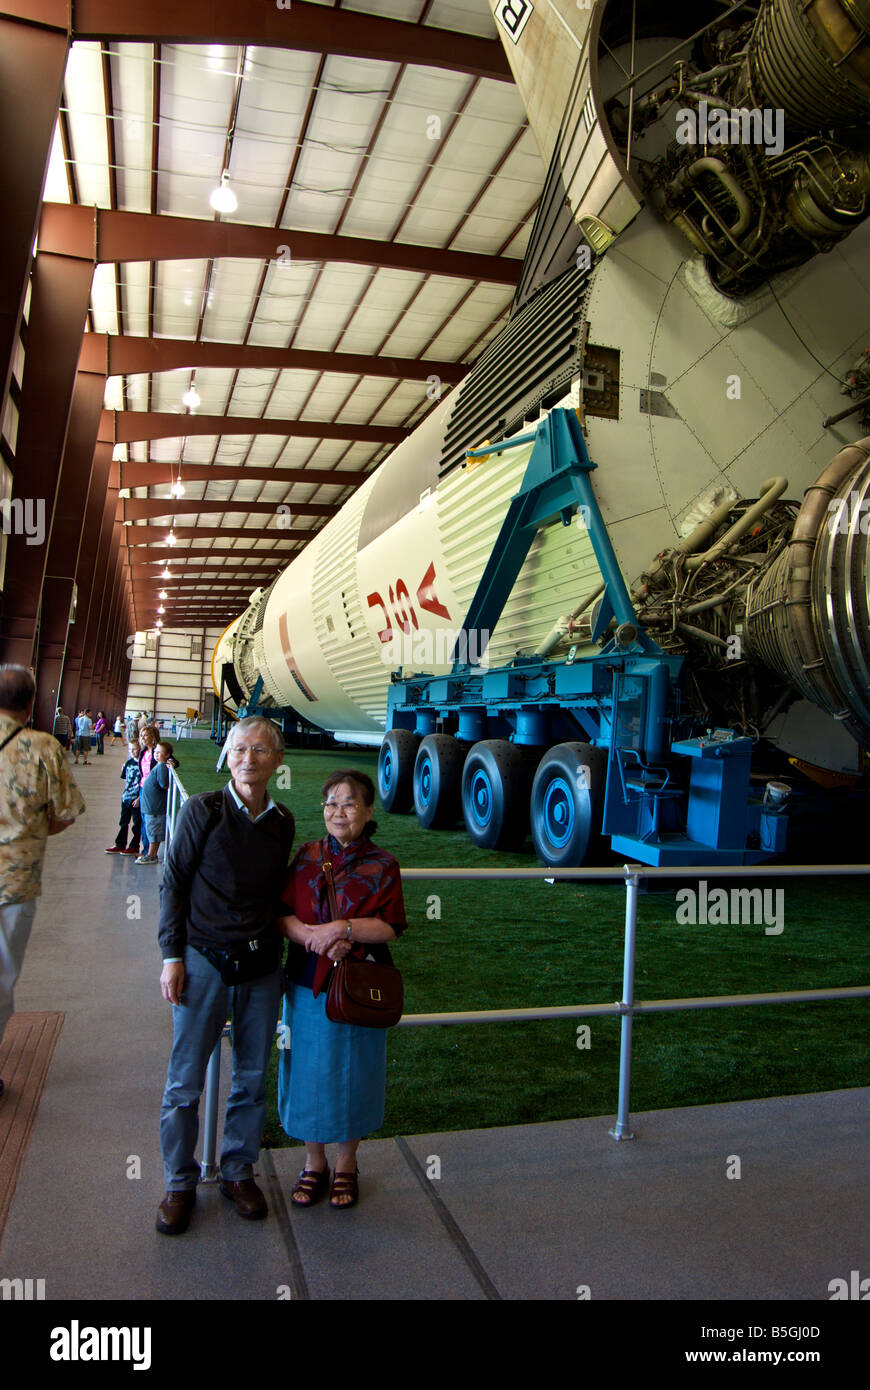 Viewers posing in front of massive Saturn V rocket used in the Apollo space missions to the moon Stock Photo